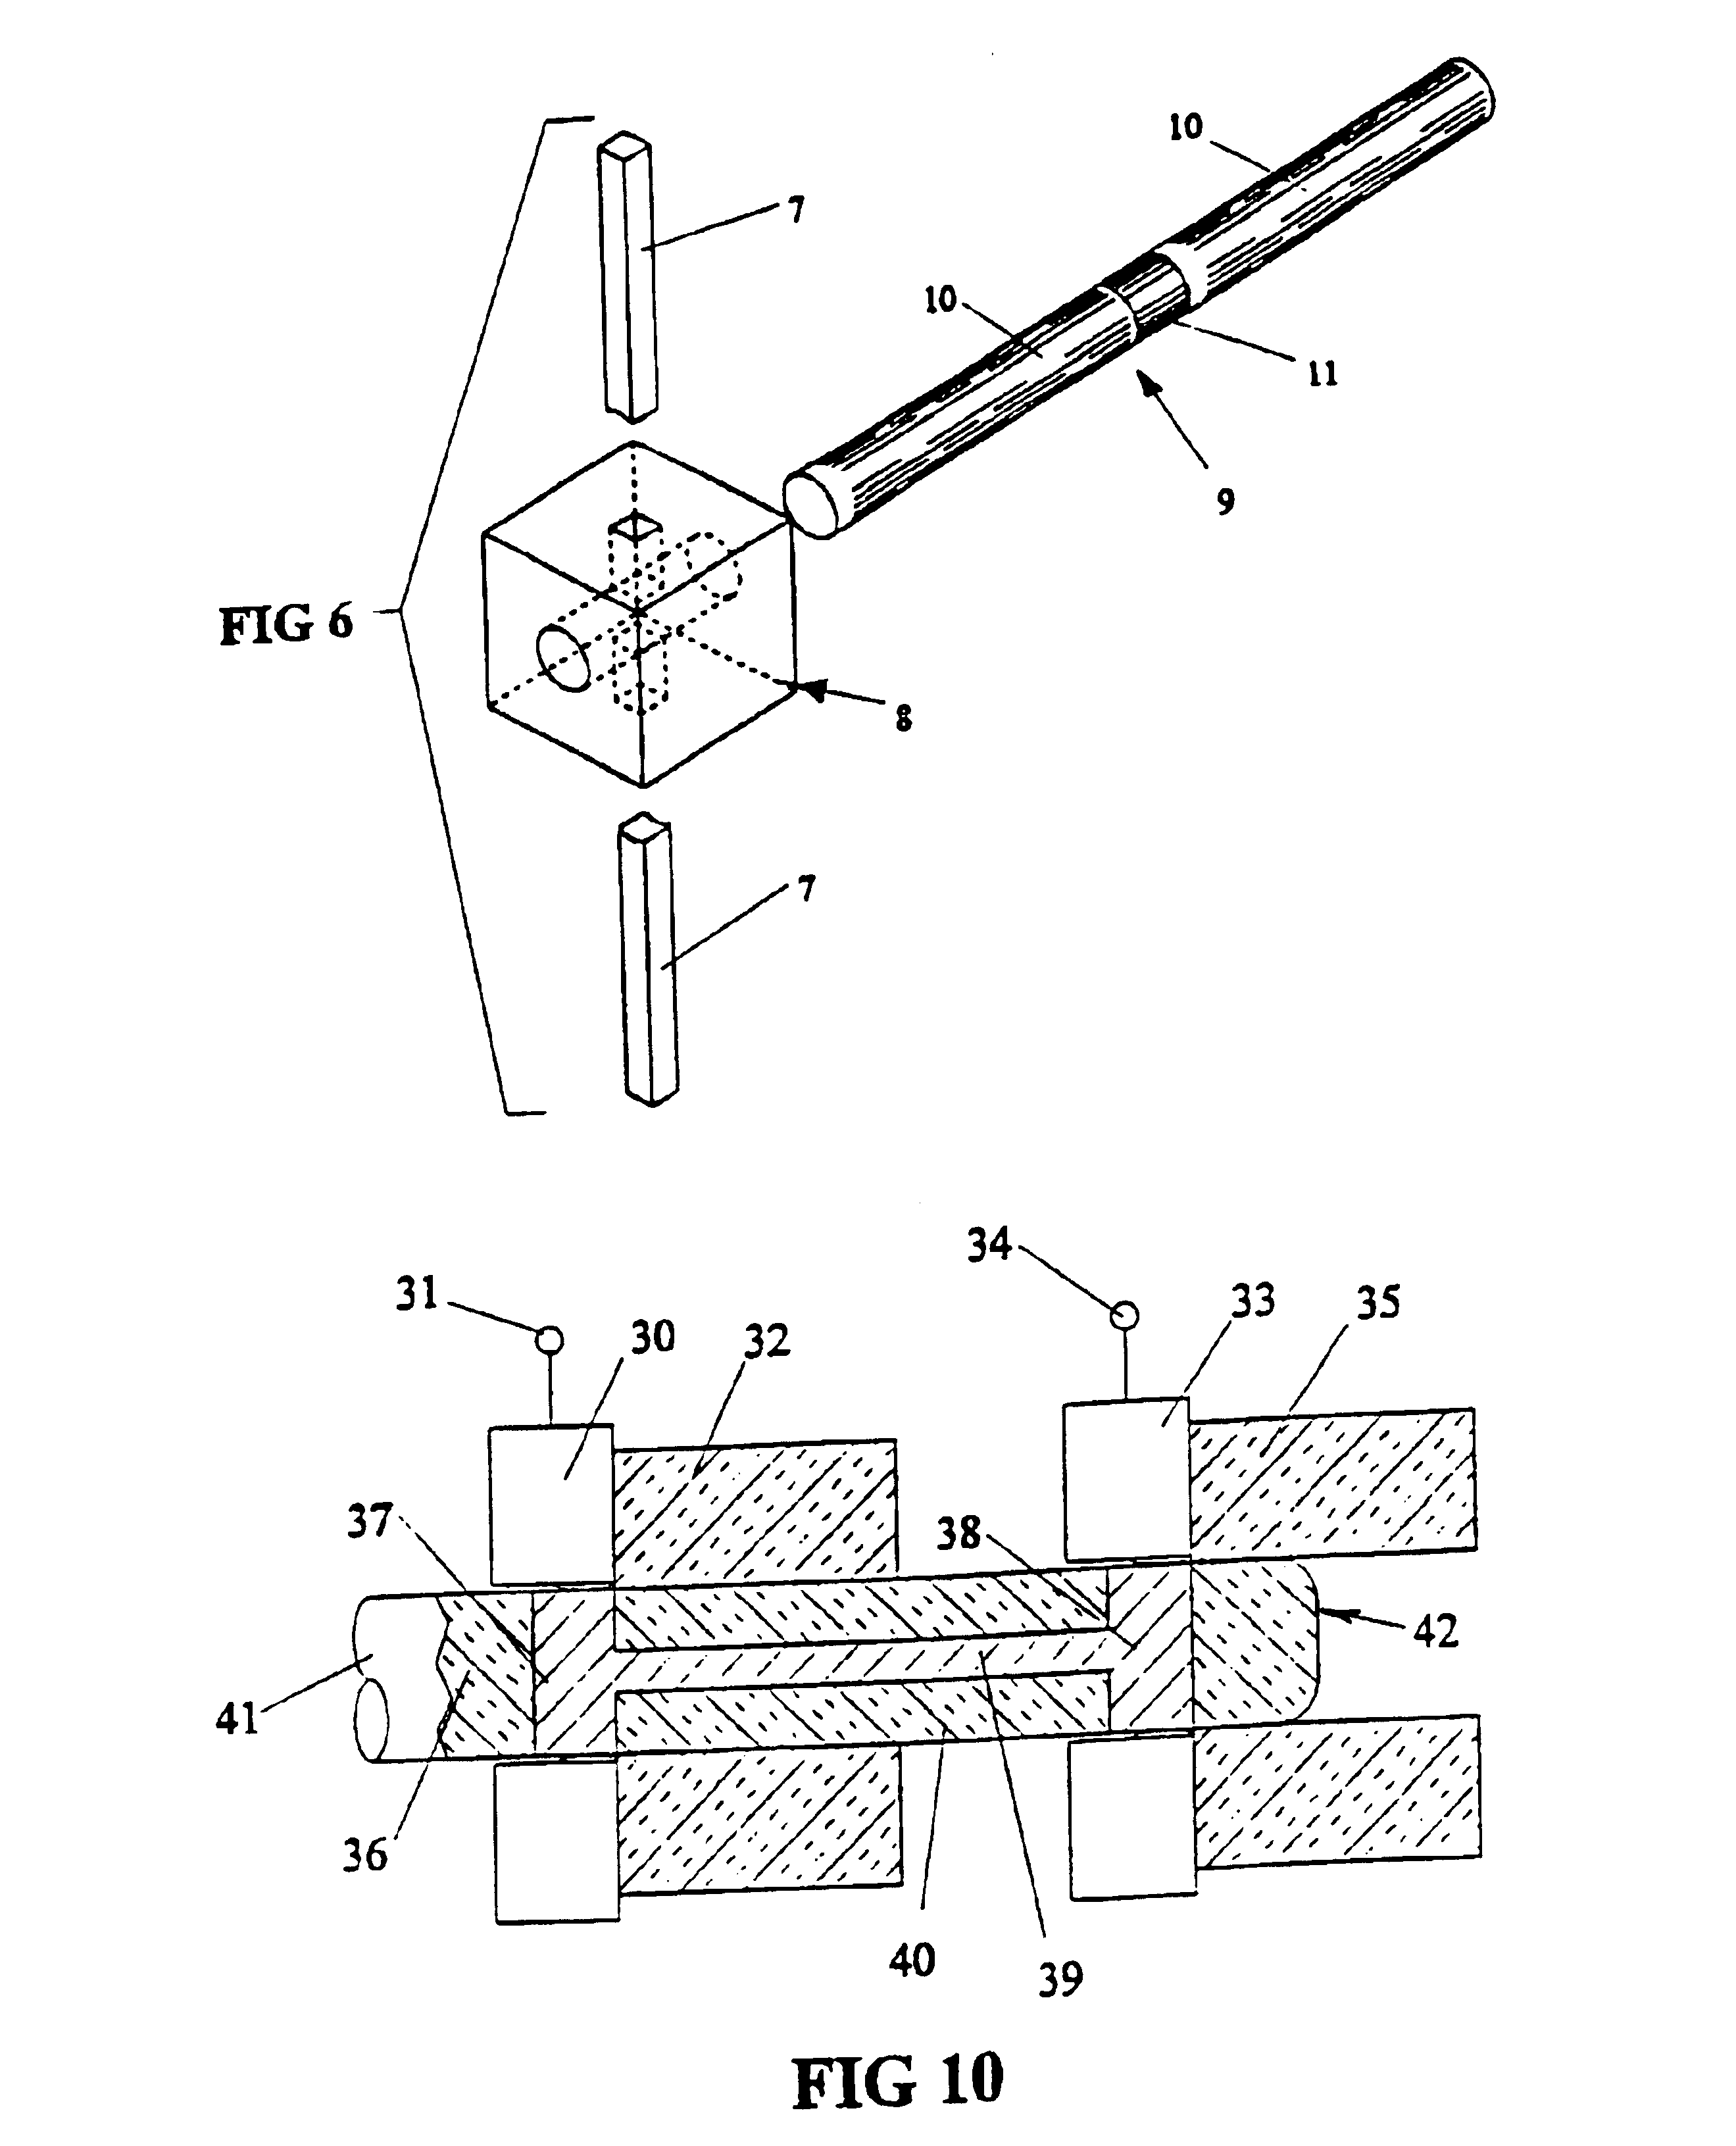 Switch contact device for interrupting high current, high voltage, AC and DC circuits